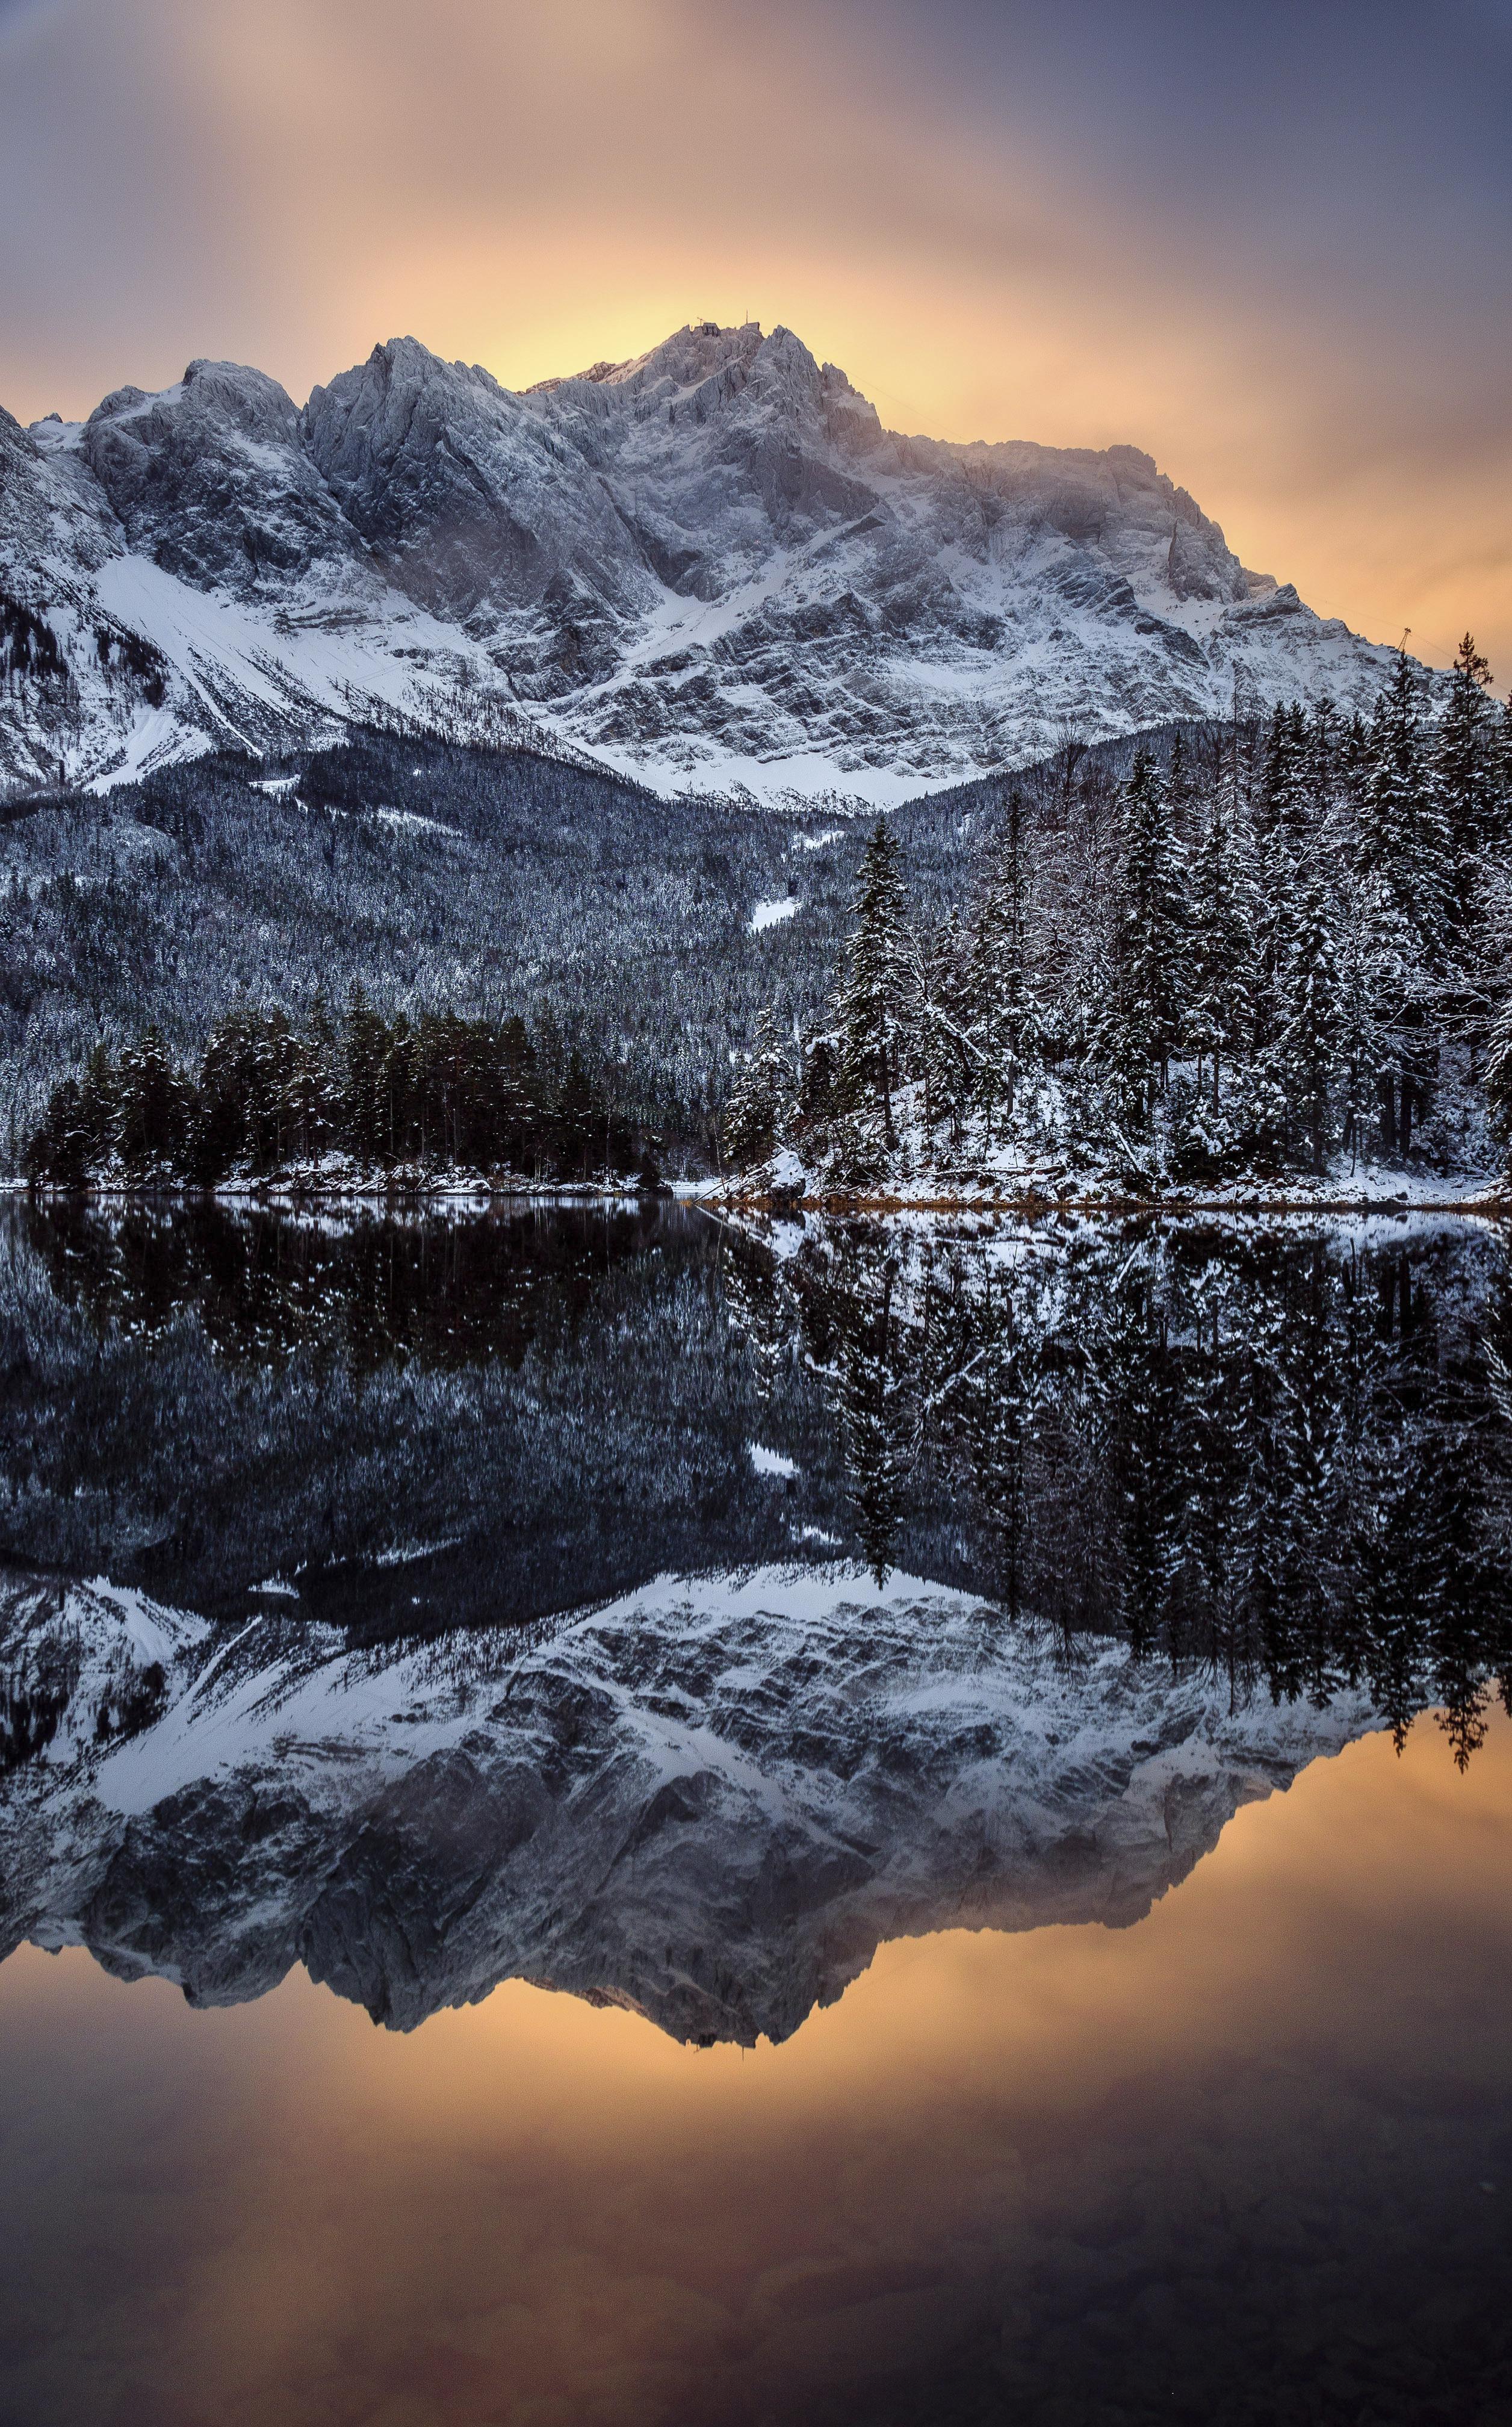 The sun sets behind a snow-capped mountain and lake.